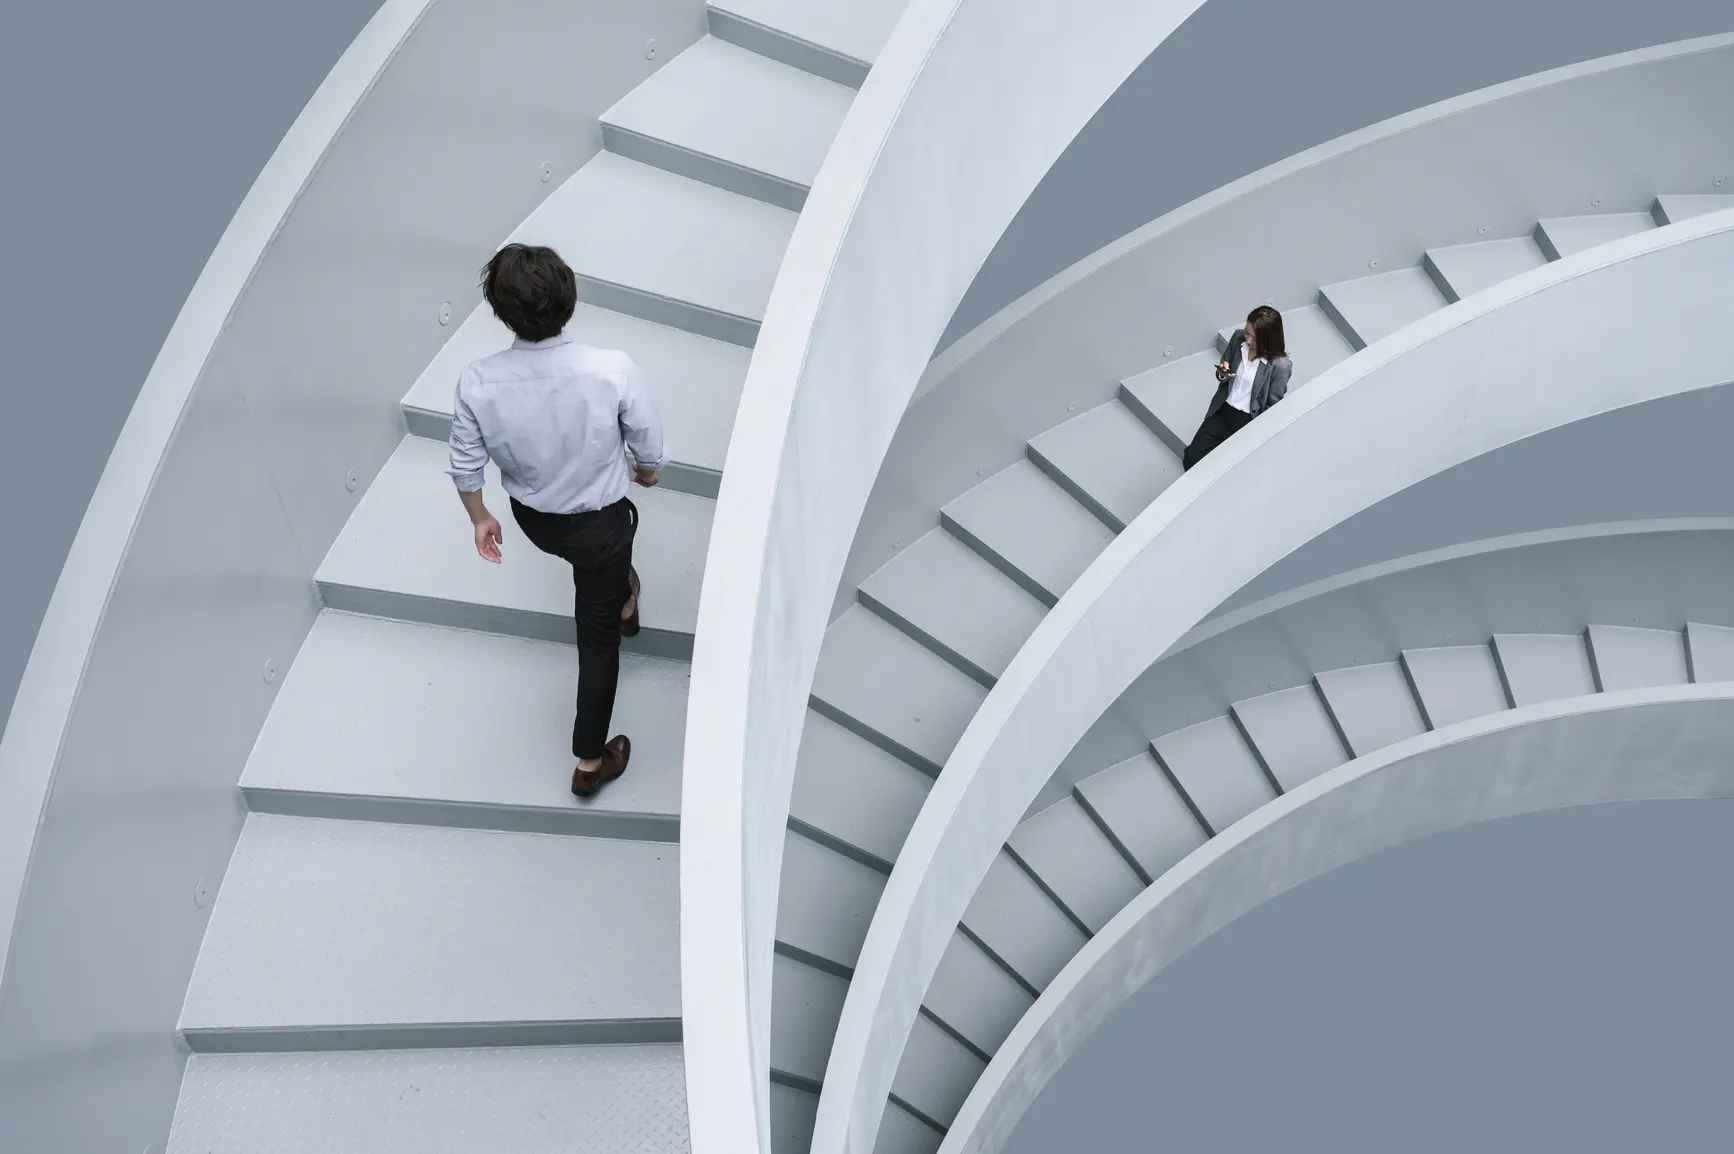 Bird's eye view of modern white spiral staircase showing two businessmen.